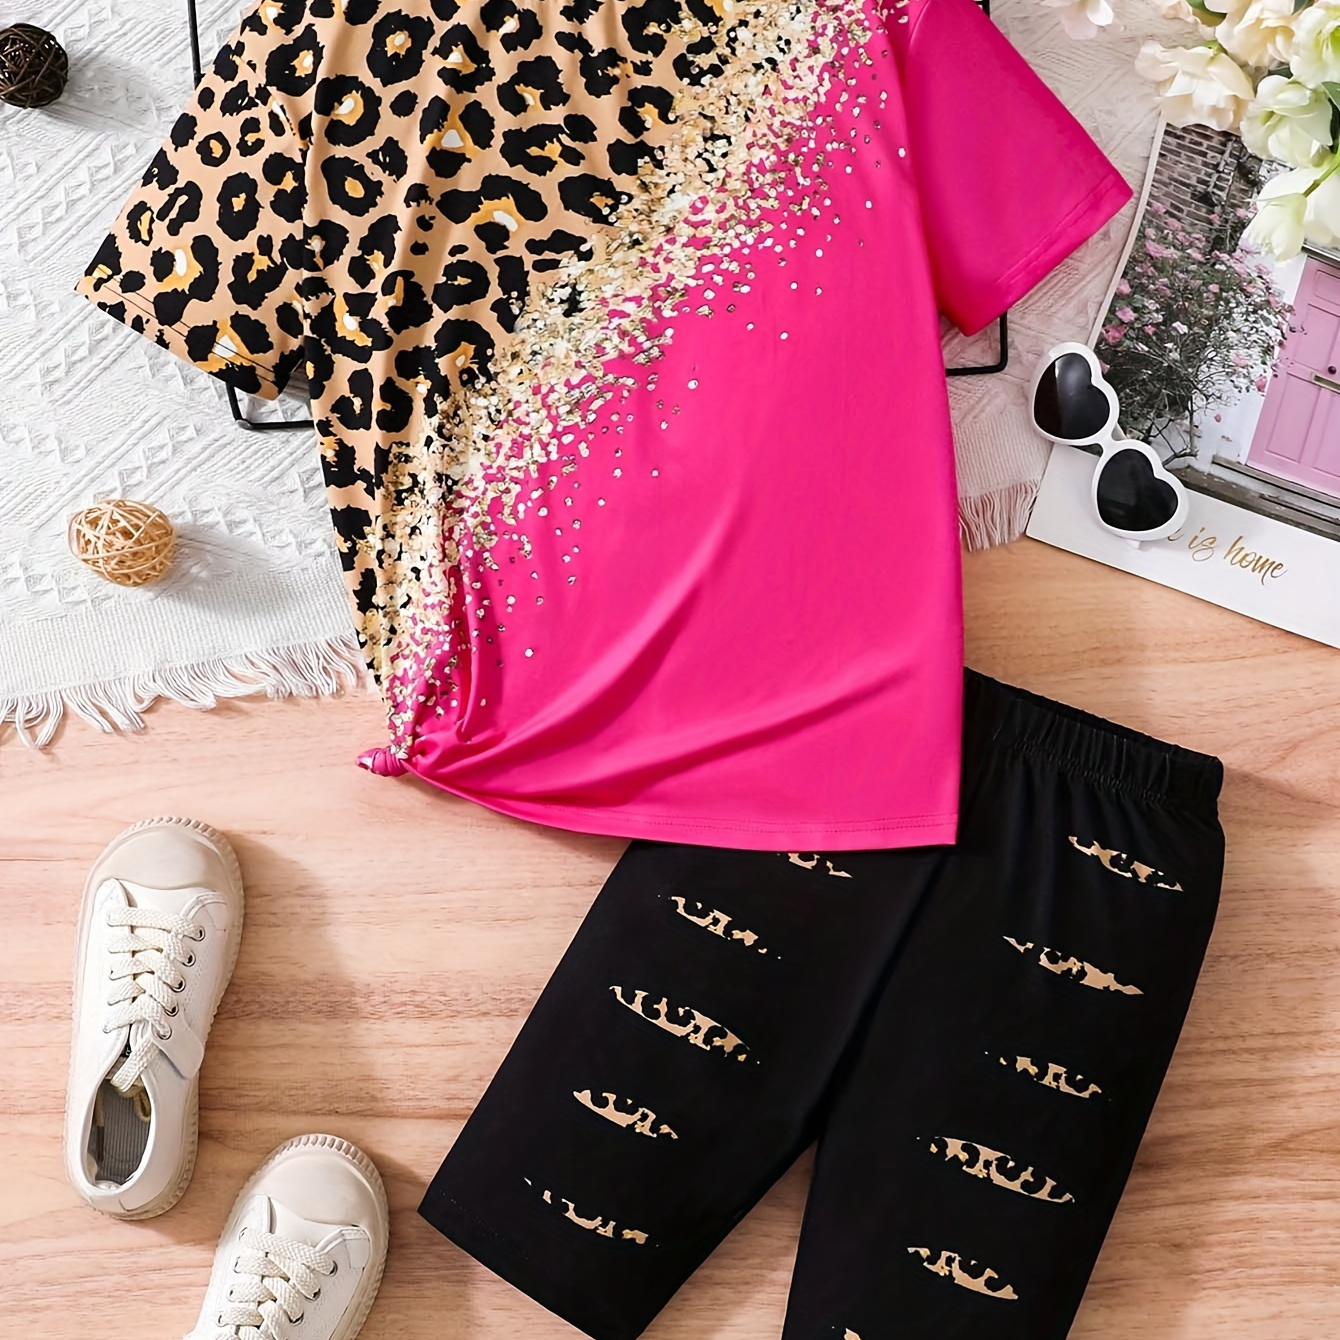 

Girl's 2pcs Chic Leopard Spliced Graphic T-shirt Top + Shorts Holiday Casual Summer Outfit Gift